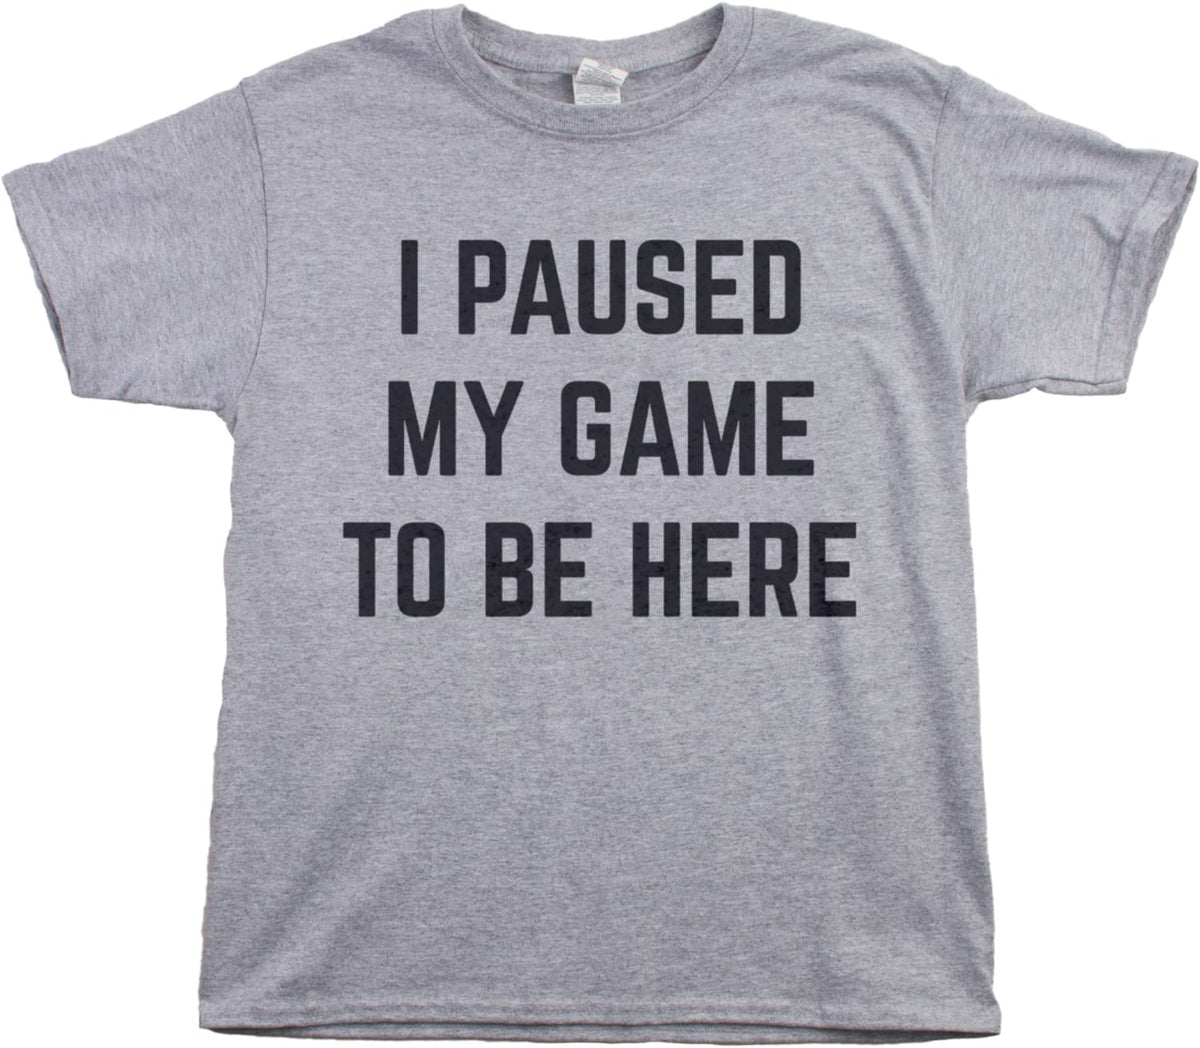 I Paused My Game to Be Here | Funny Video Gamer Gaming Player Humor Joke Youth T-Shirt